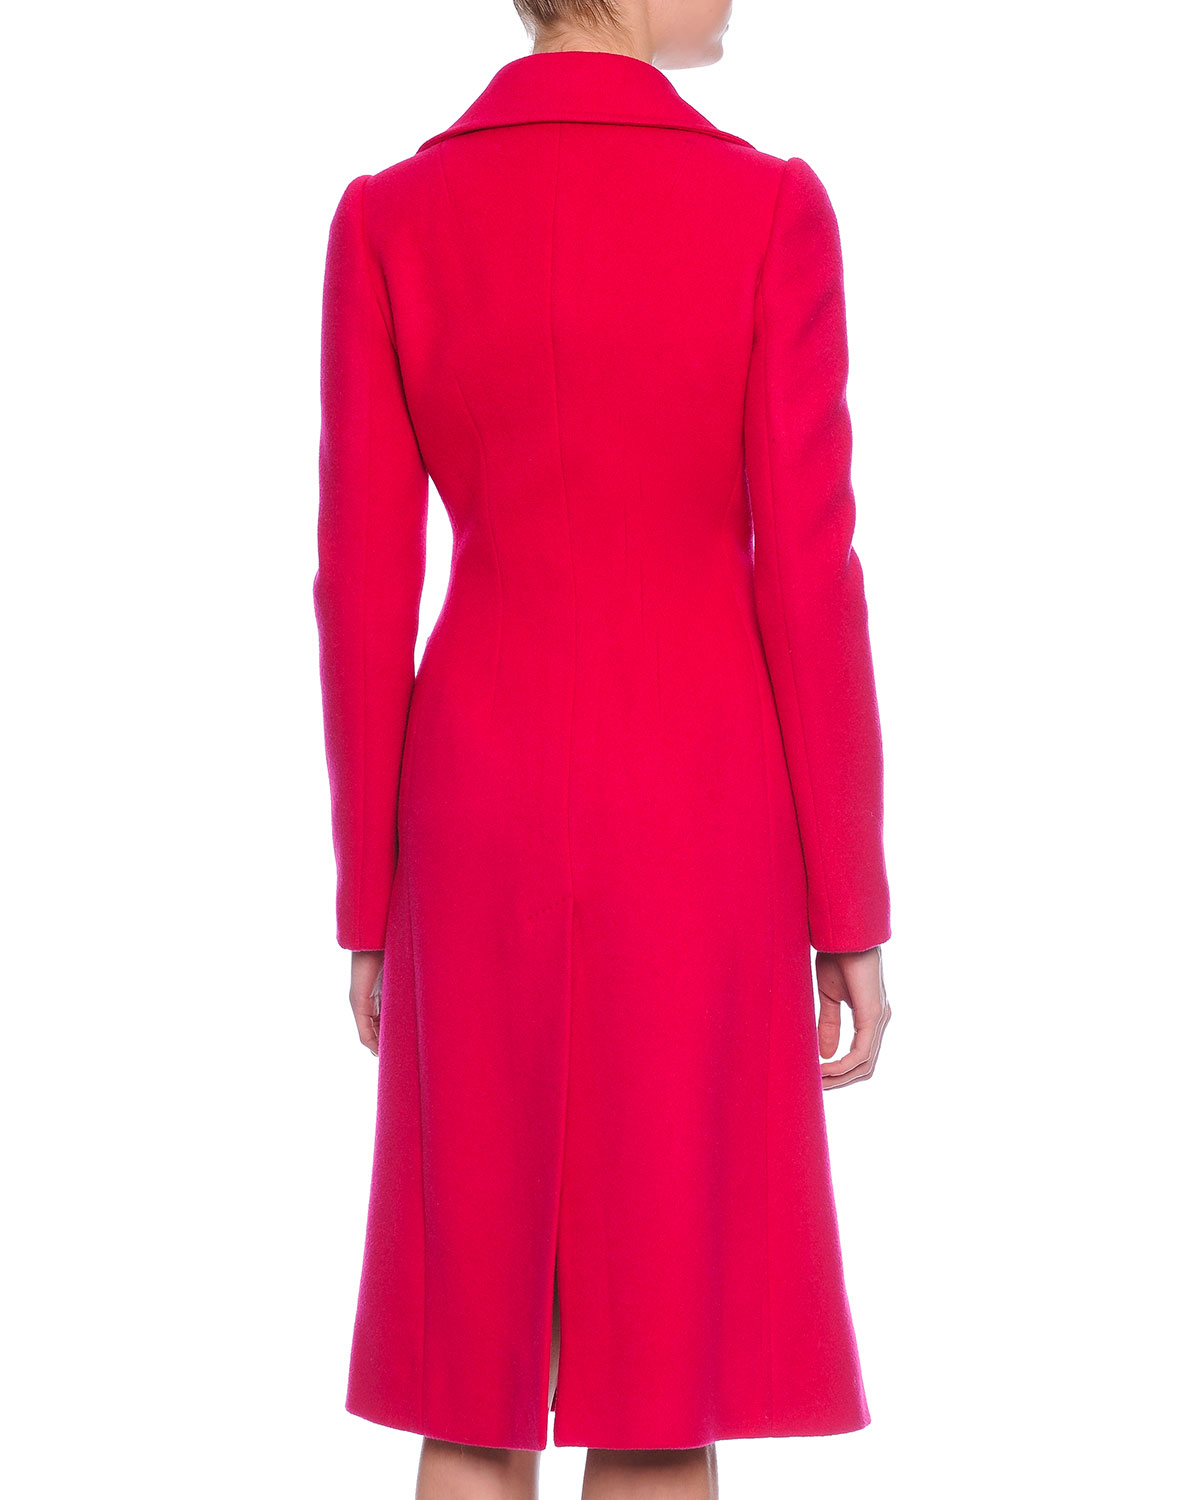 Dolce & gabbana Wool-Blend Fitted Coat in Pink | Lyst